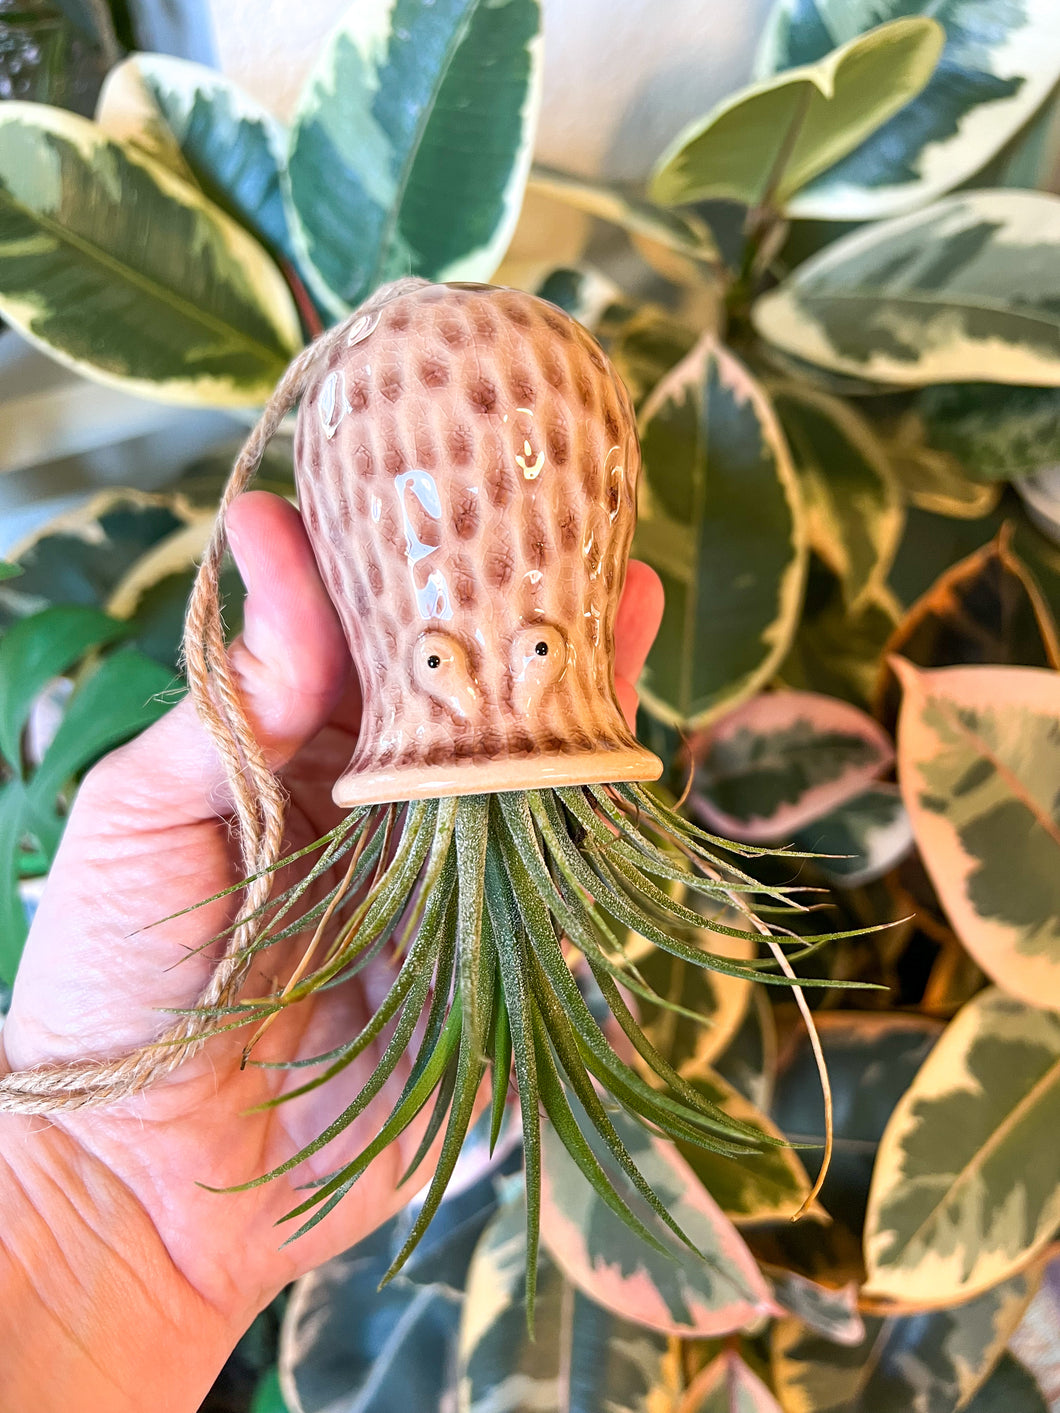 Ceramic octopus air plant holder (Air plant not included)